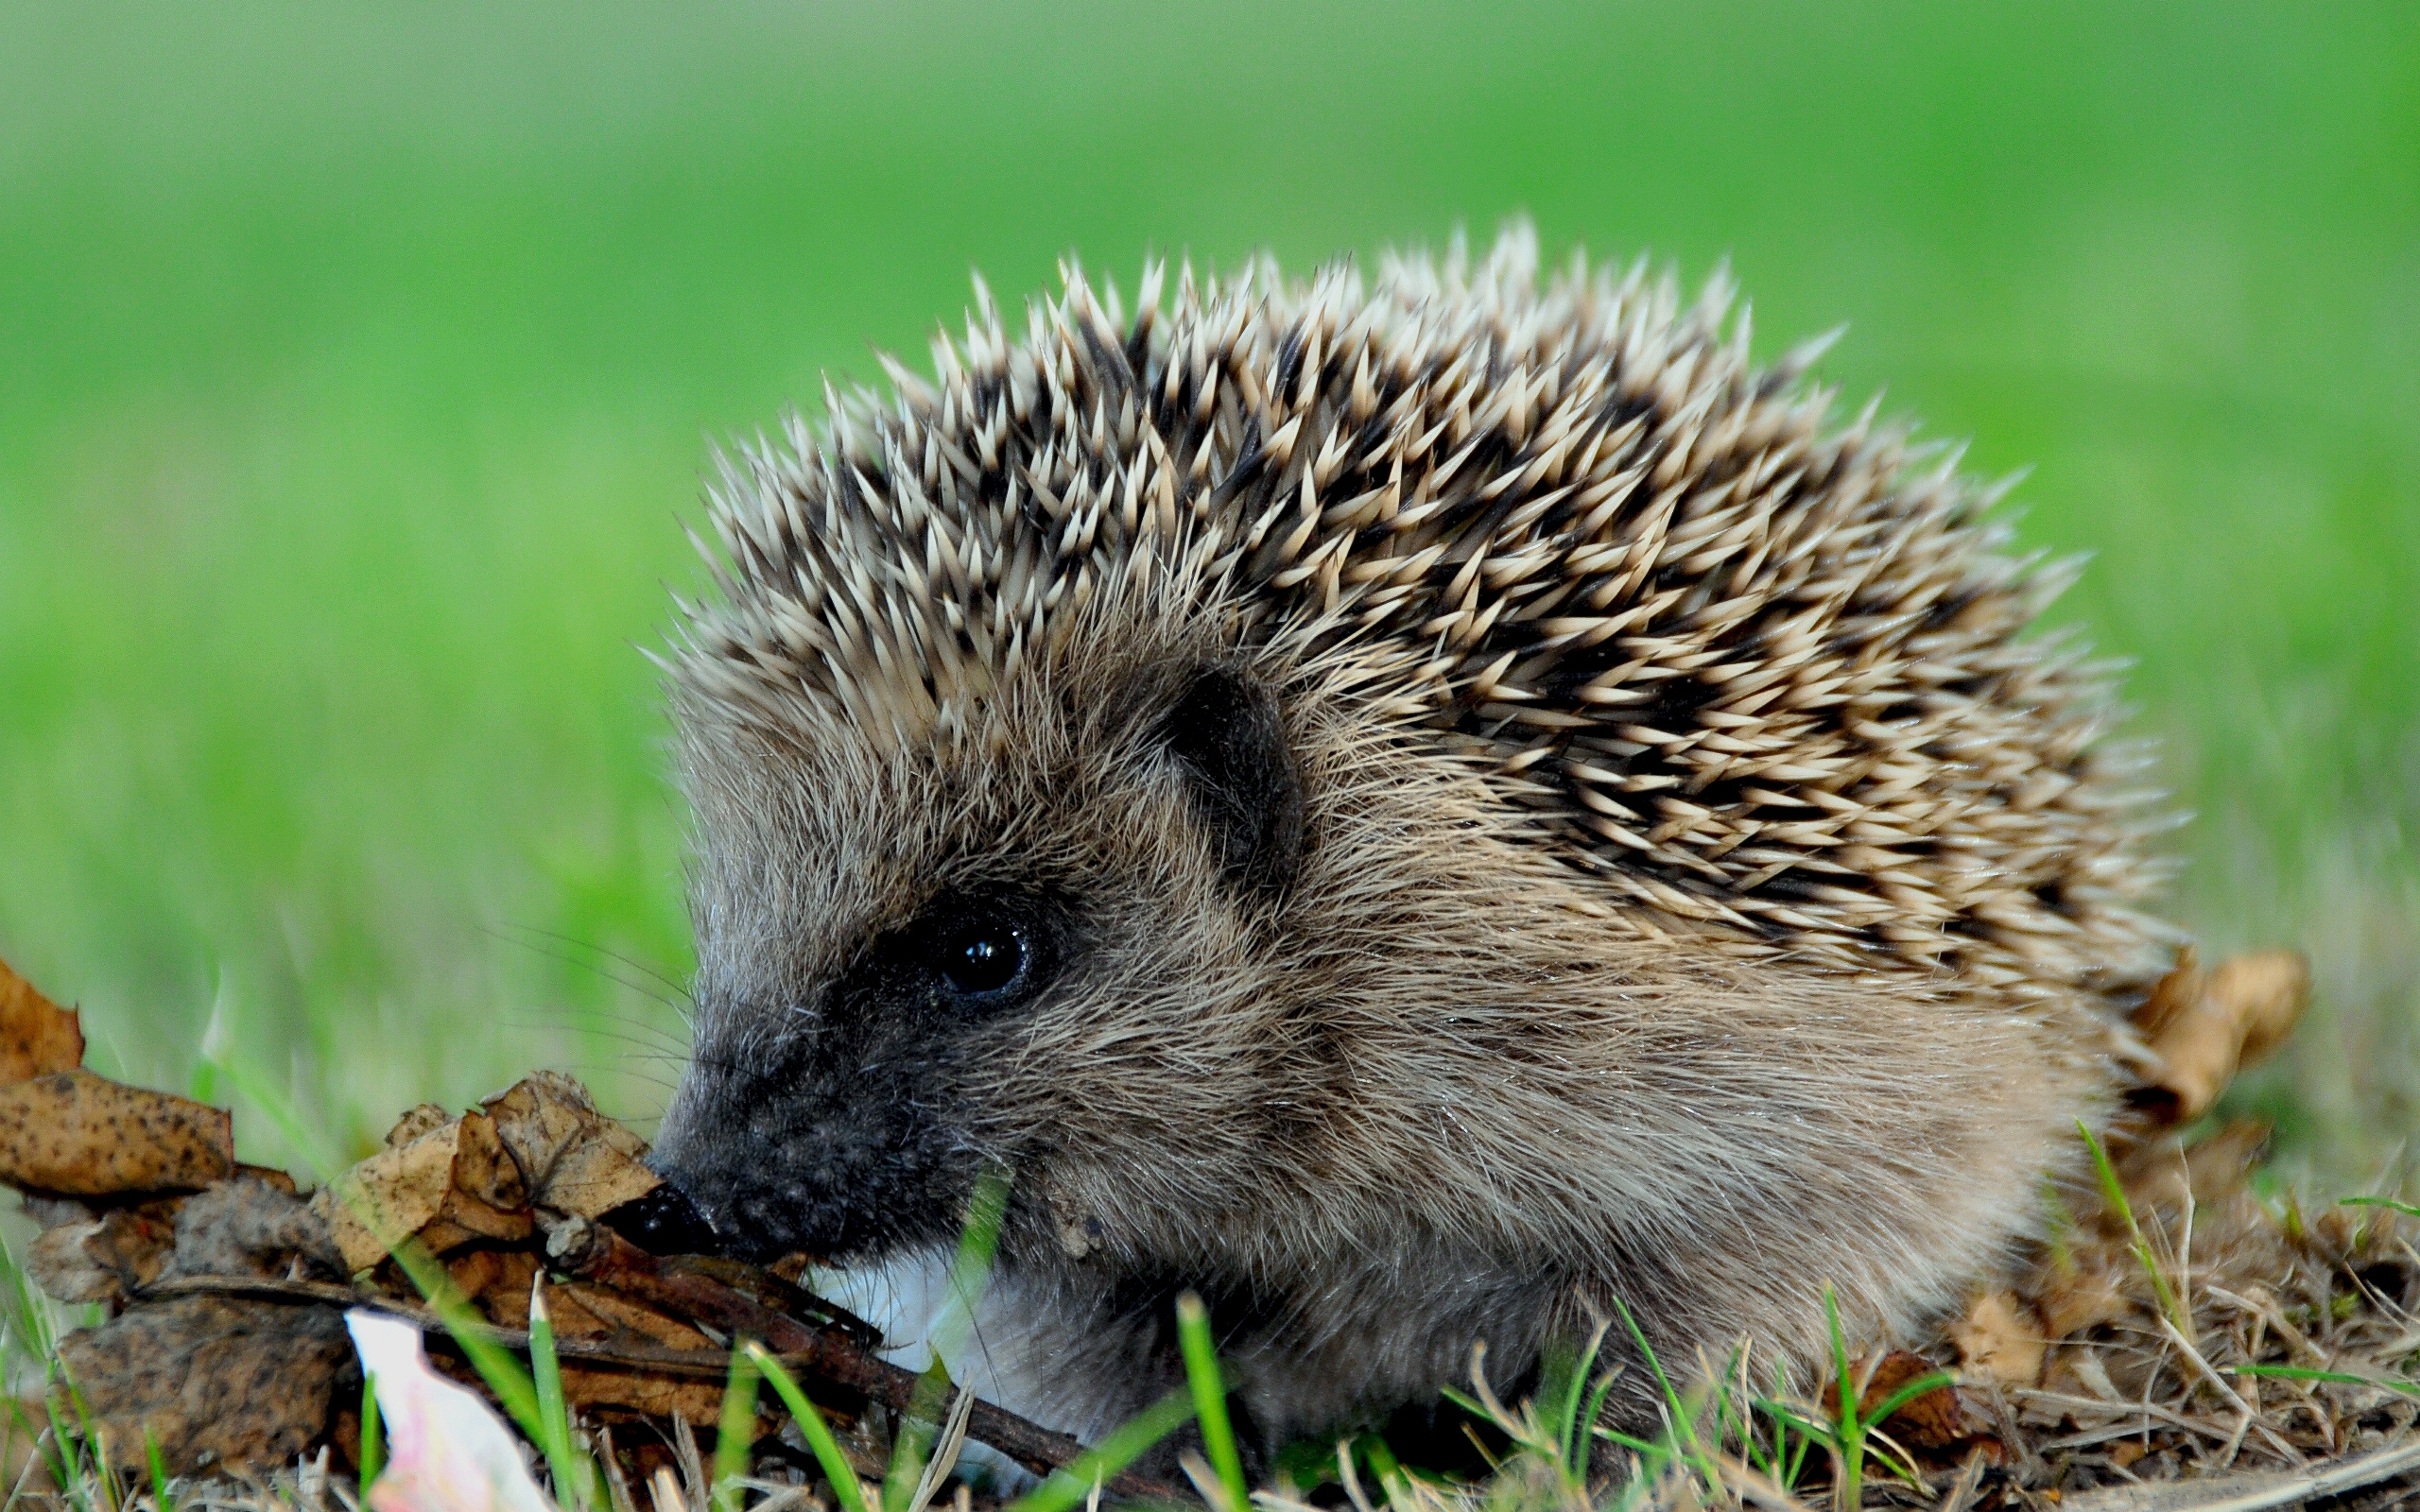 49678 download wallpaper animals, hedgehogs screensavers and pictures for free